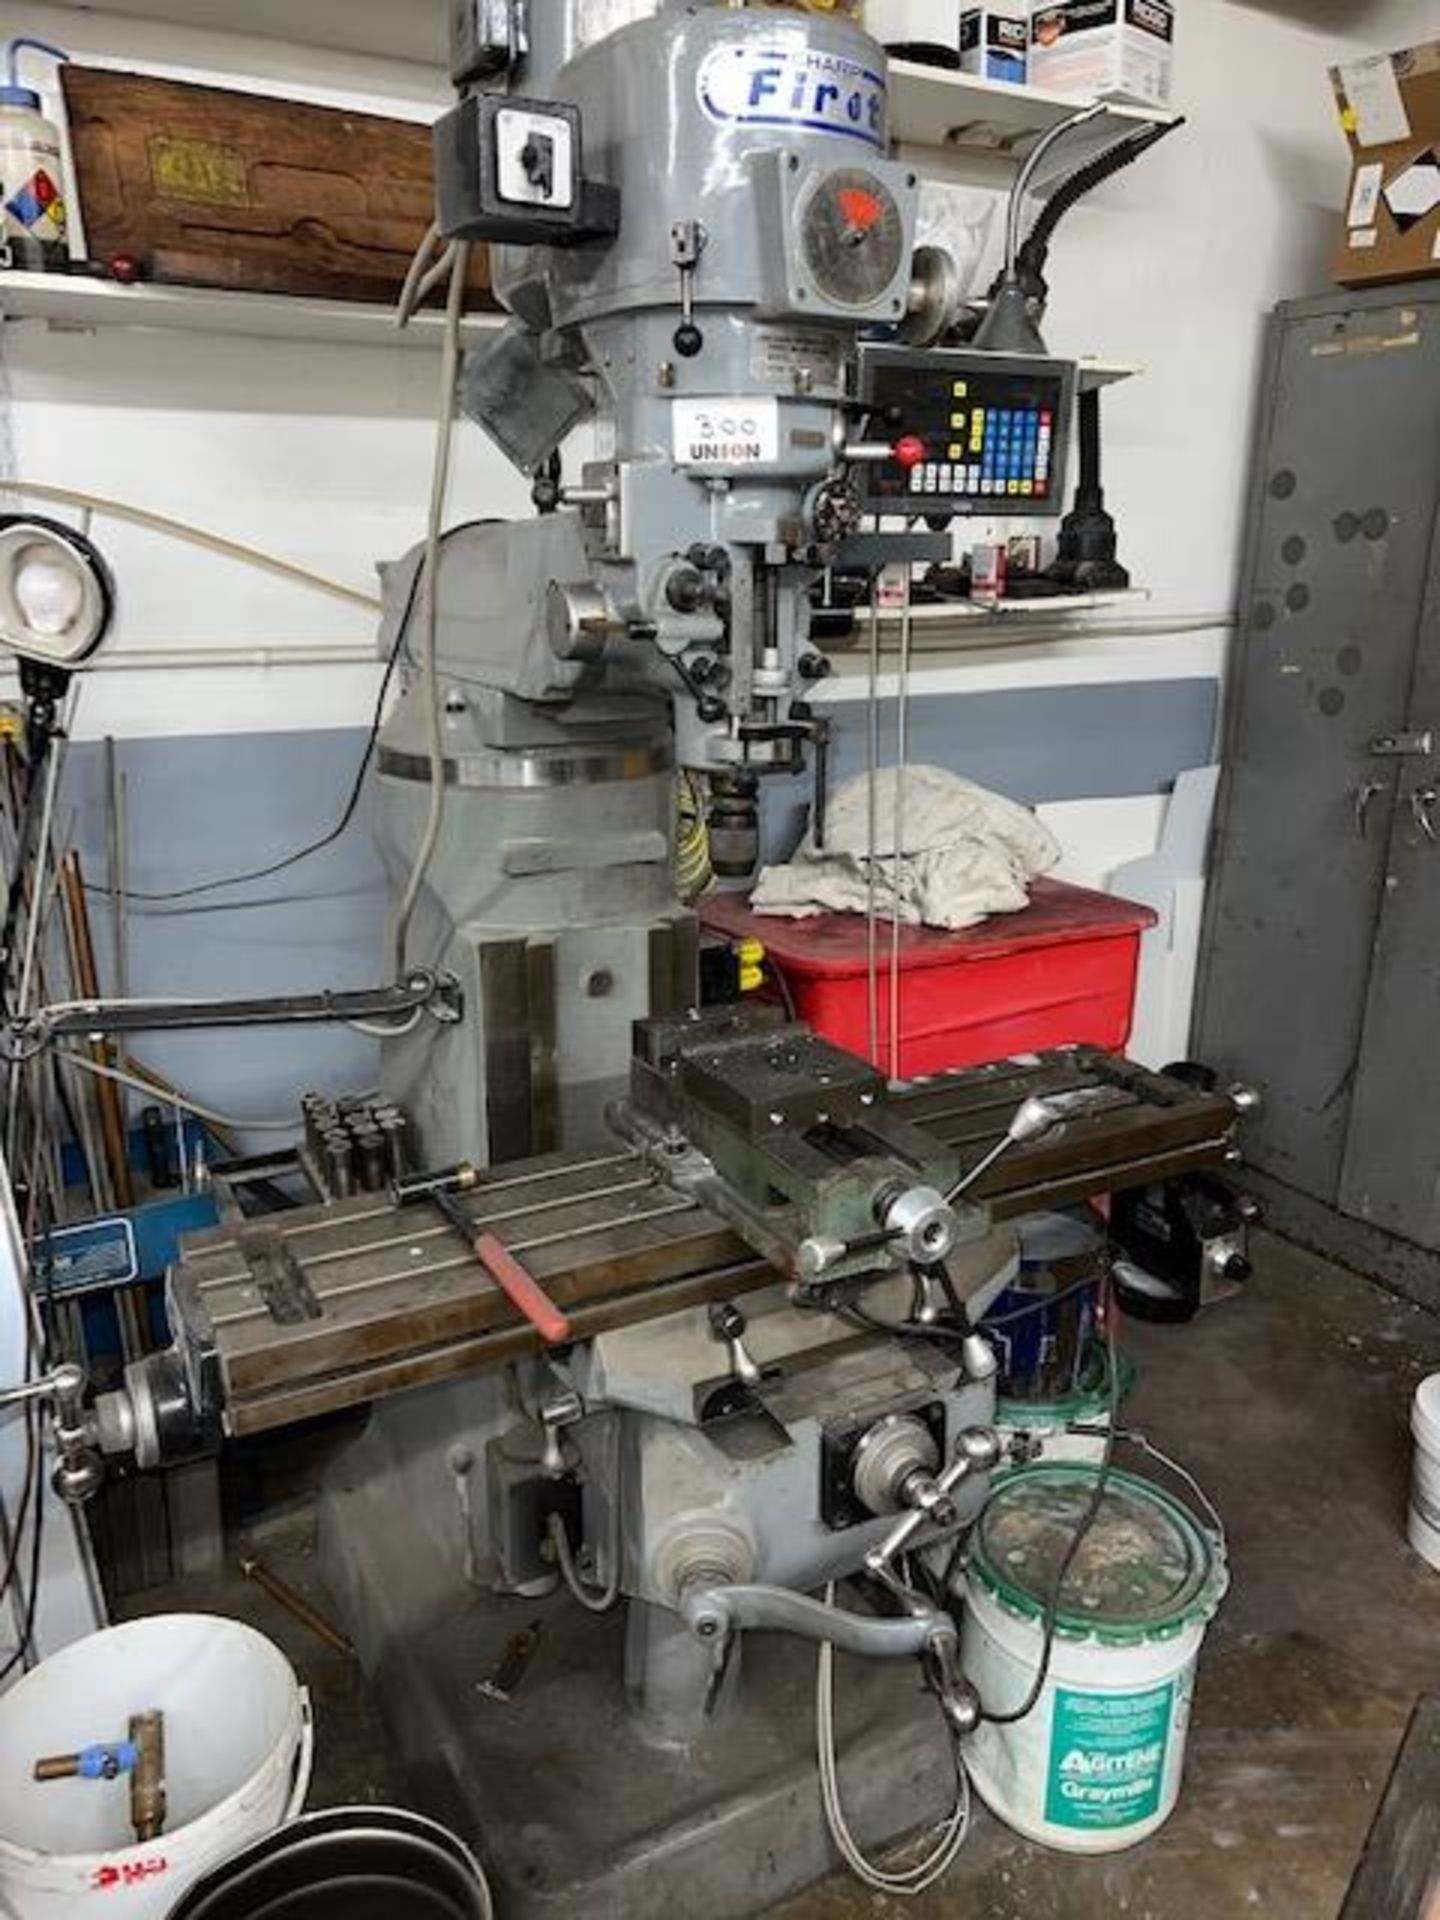 Asset 300A - Sharp First Long Chang Machinery model LC-1 1/2VH Milling machine with 9" wide x 42"